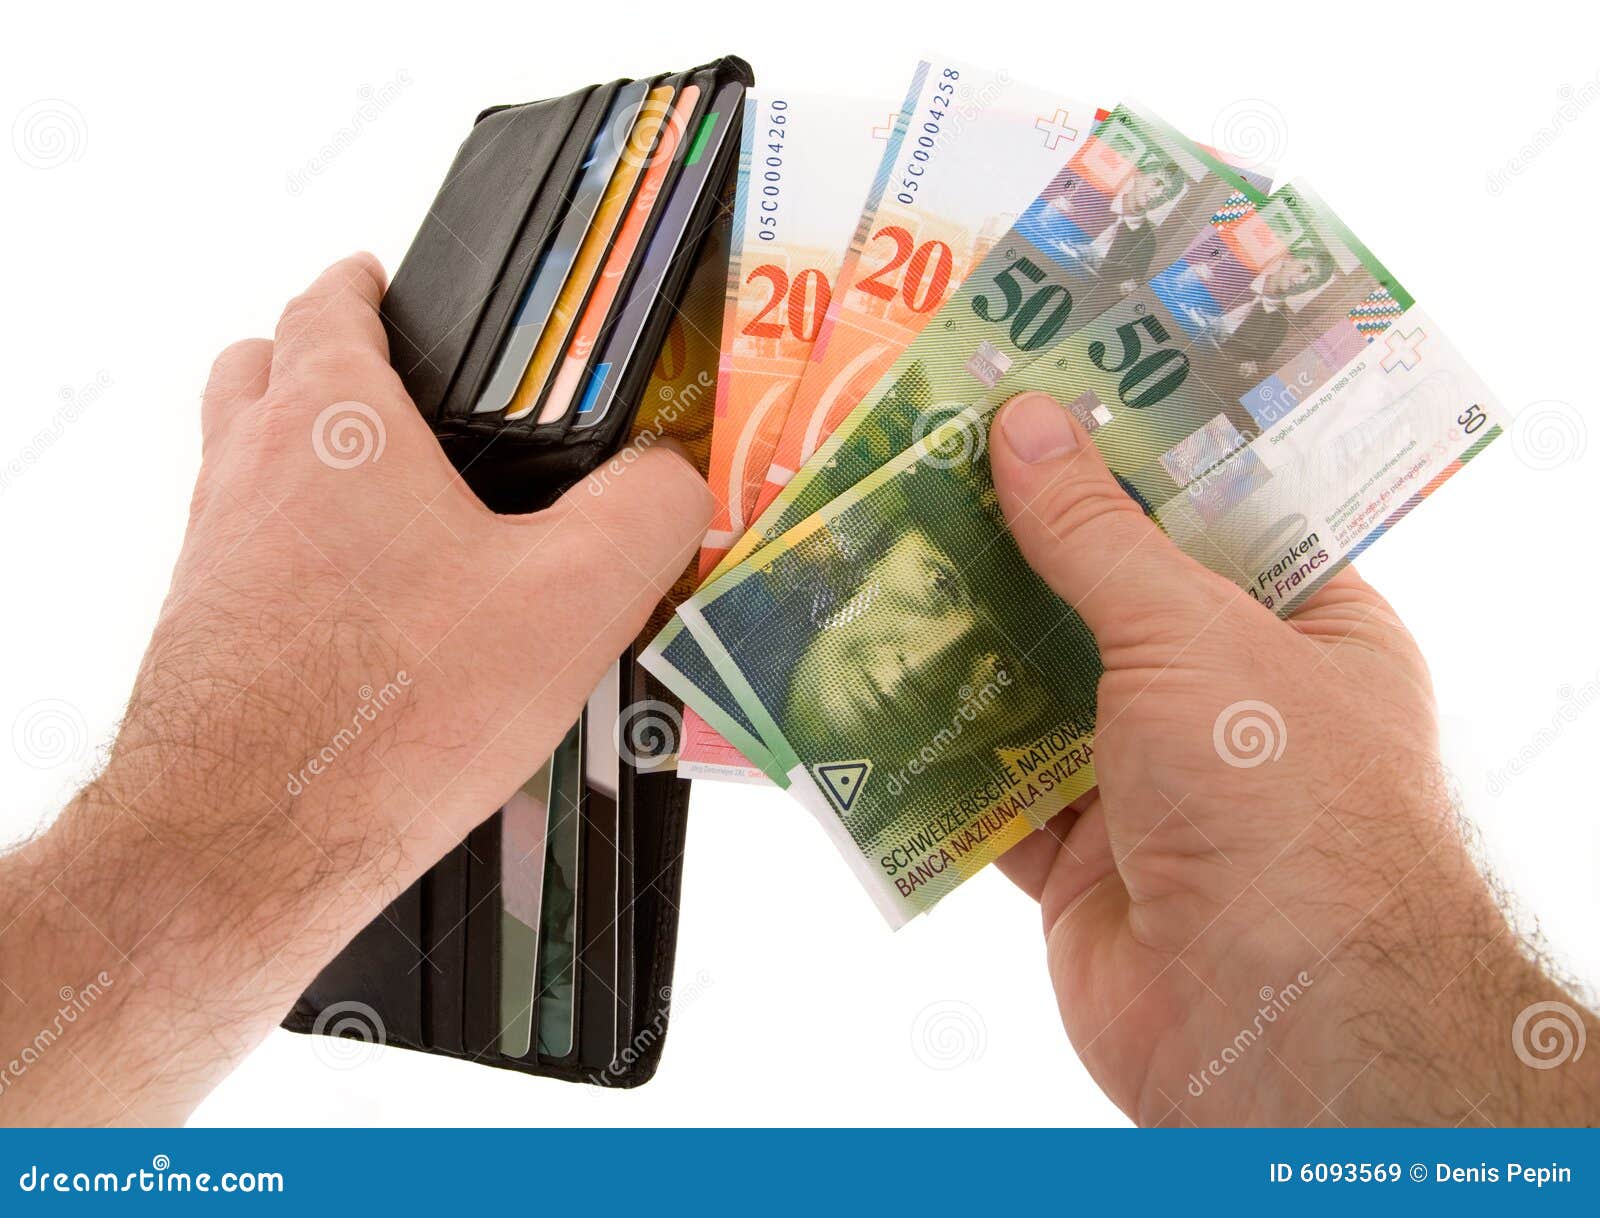 paying cash with swiss francs currency